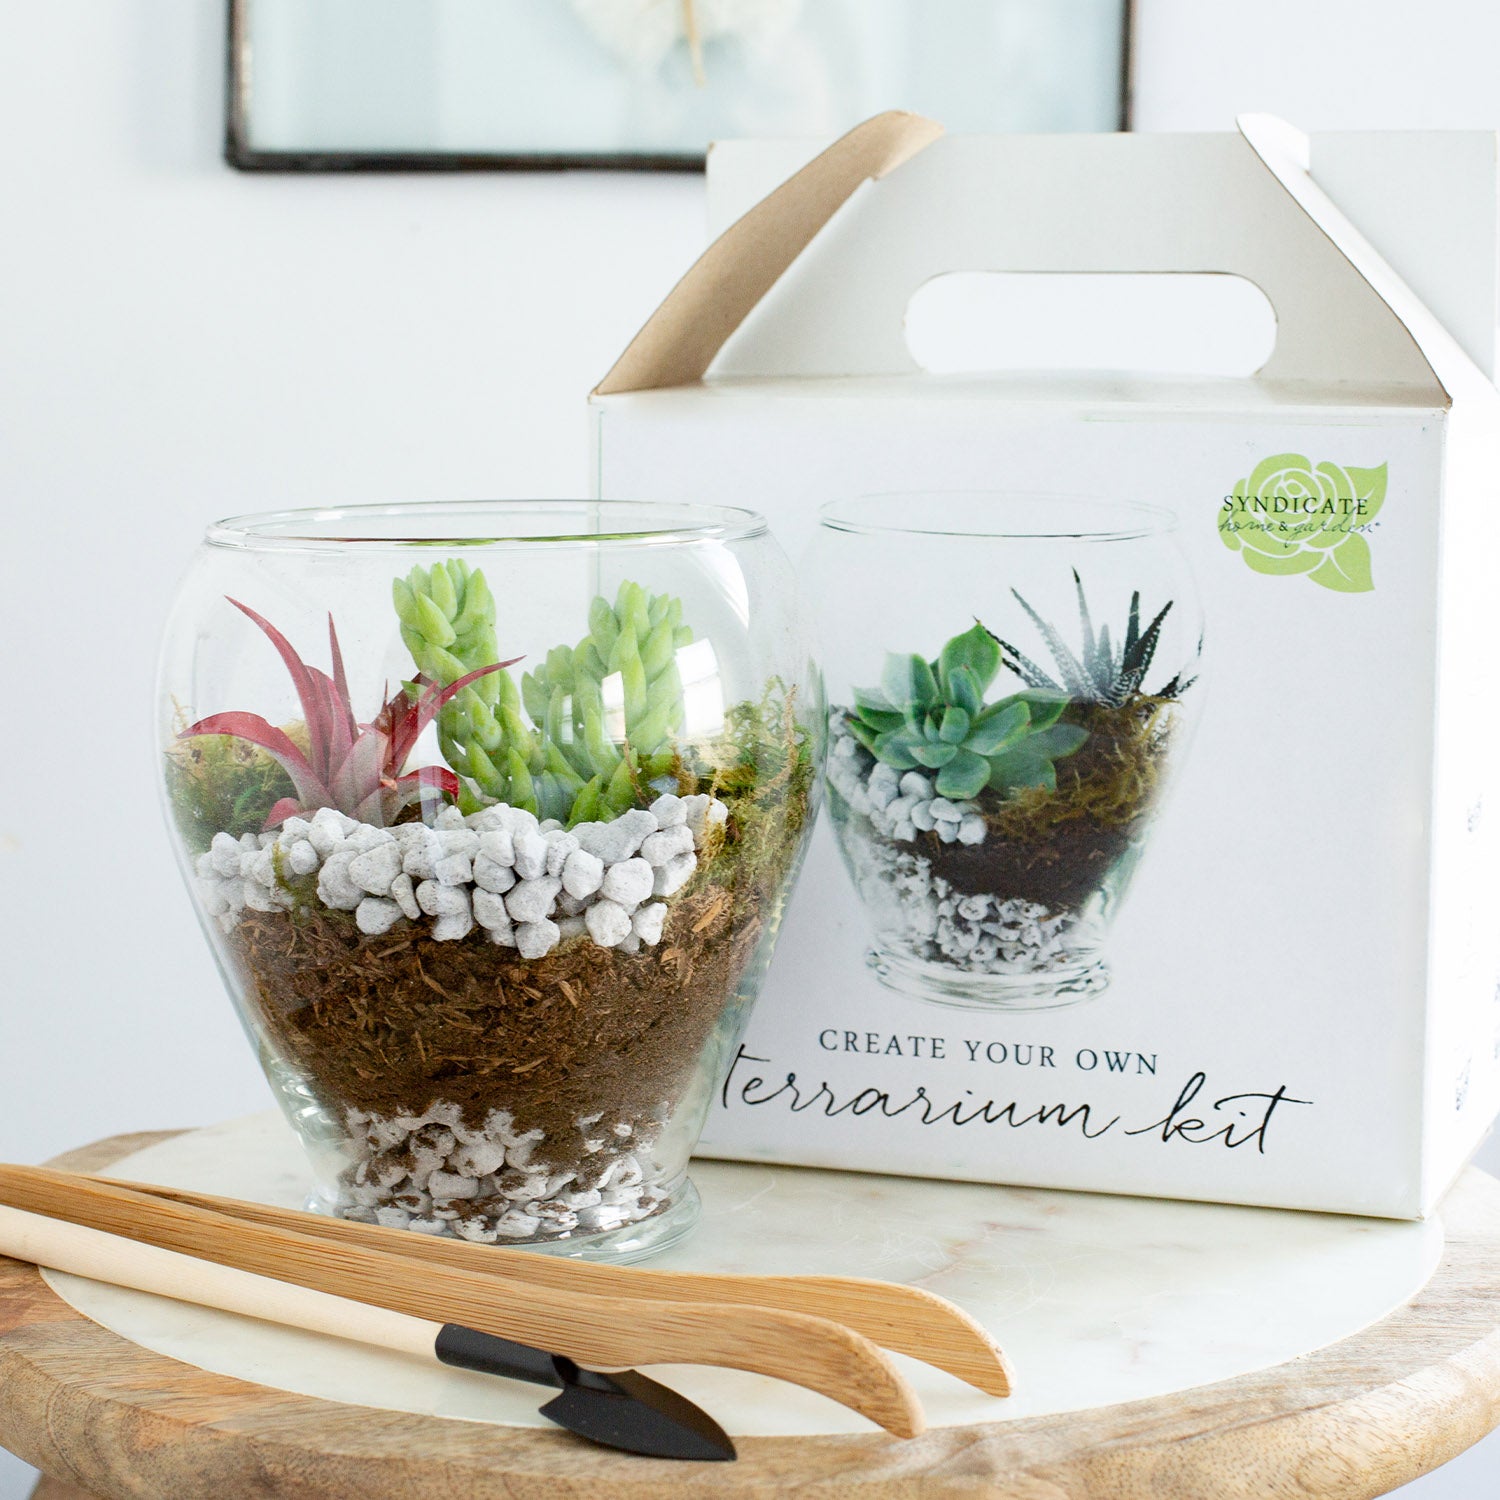 A filled serenity create your own terrarium kit filled with all the materials.